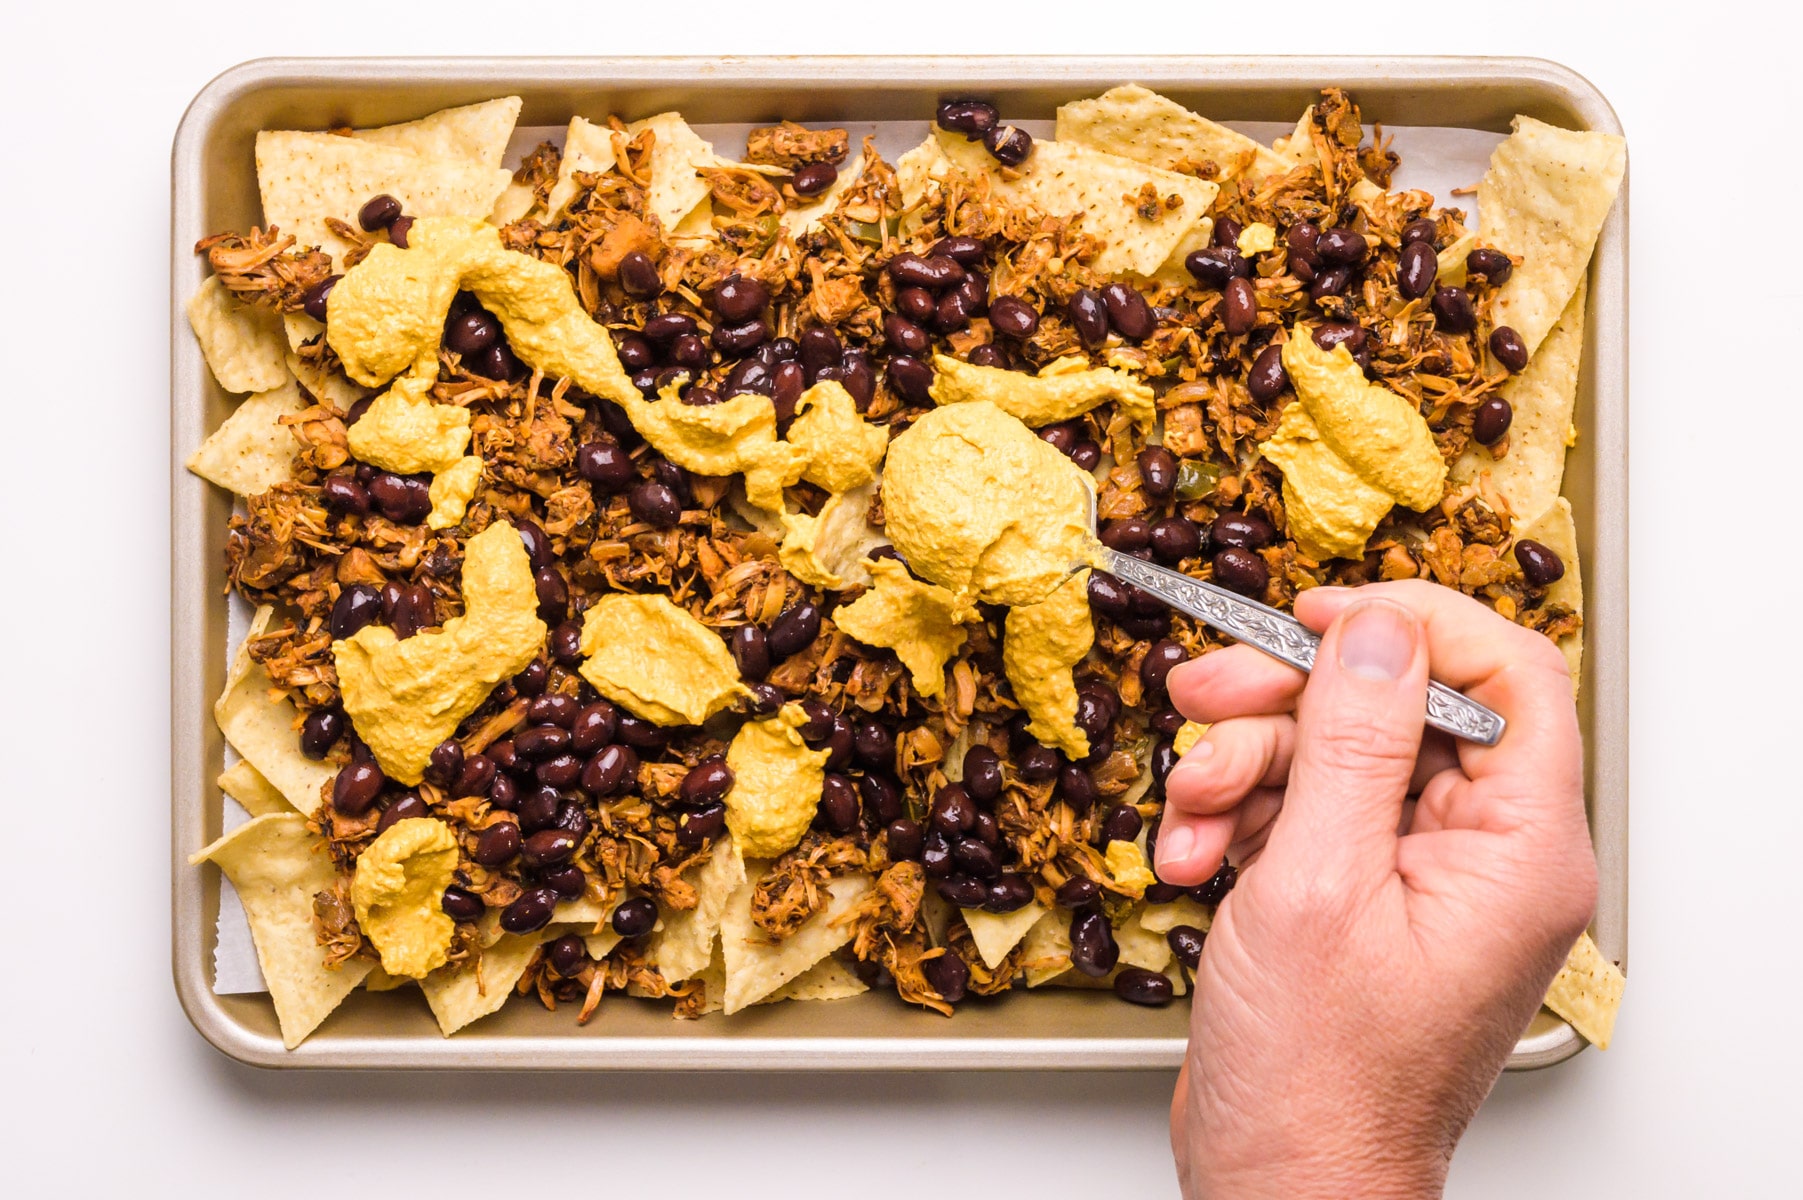 A hand holds a spoon distributing vegan nacho cheese on top of a pan of nachos.